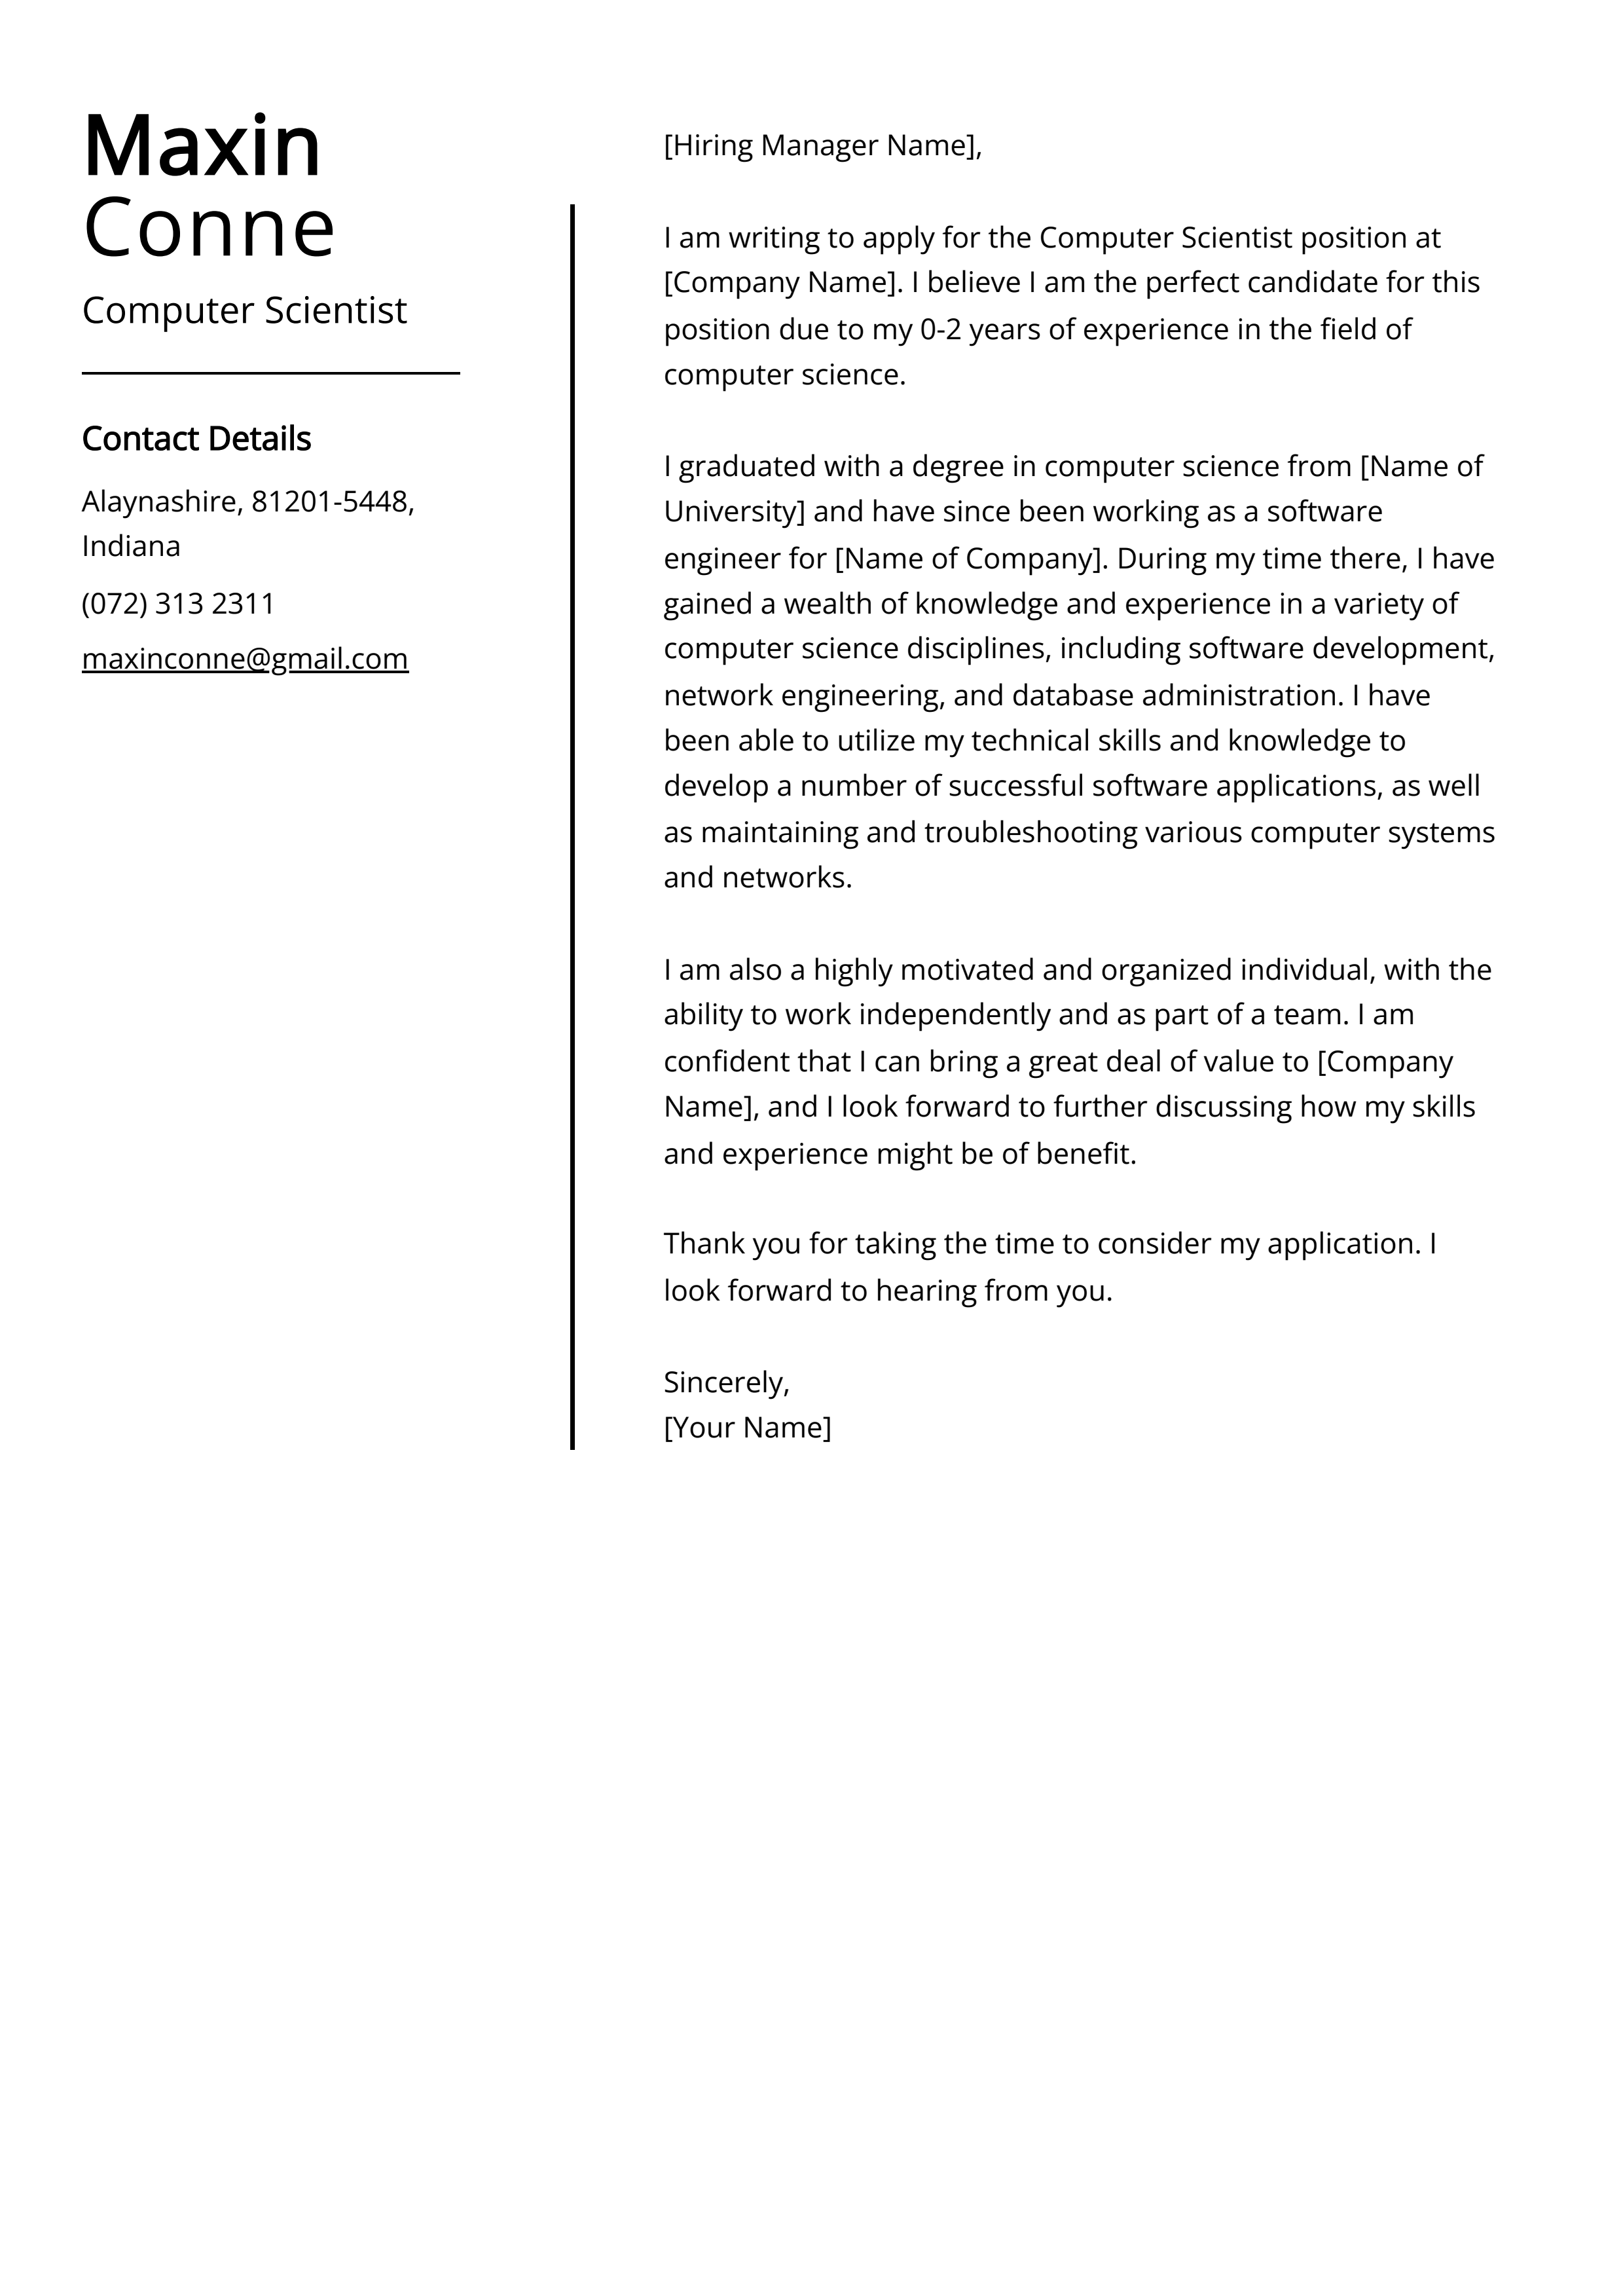 Computer Scientist Cover Letter Example